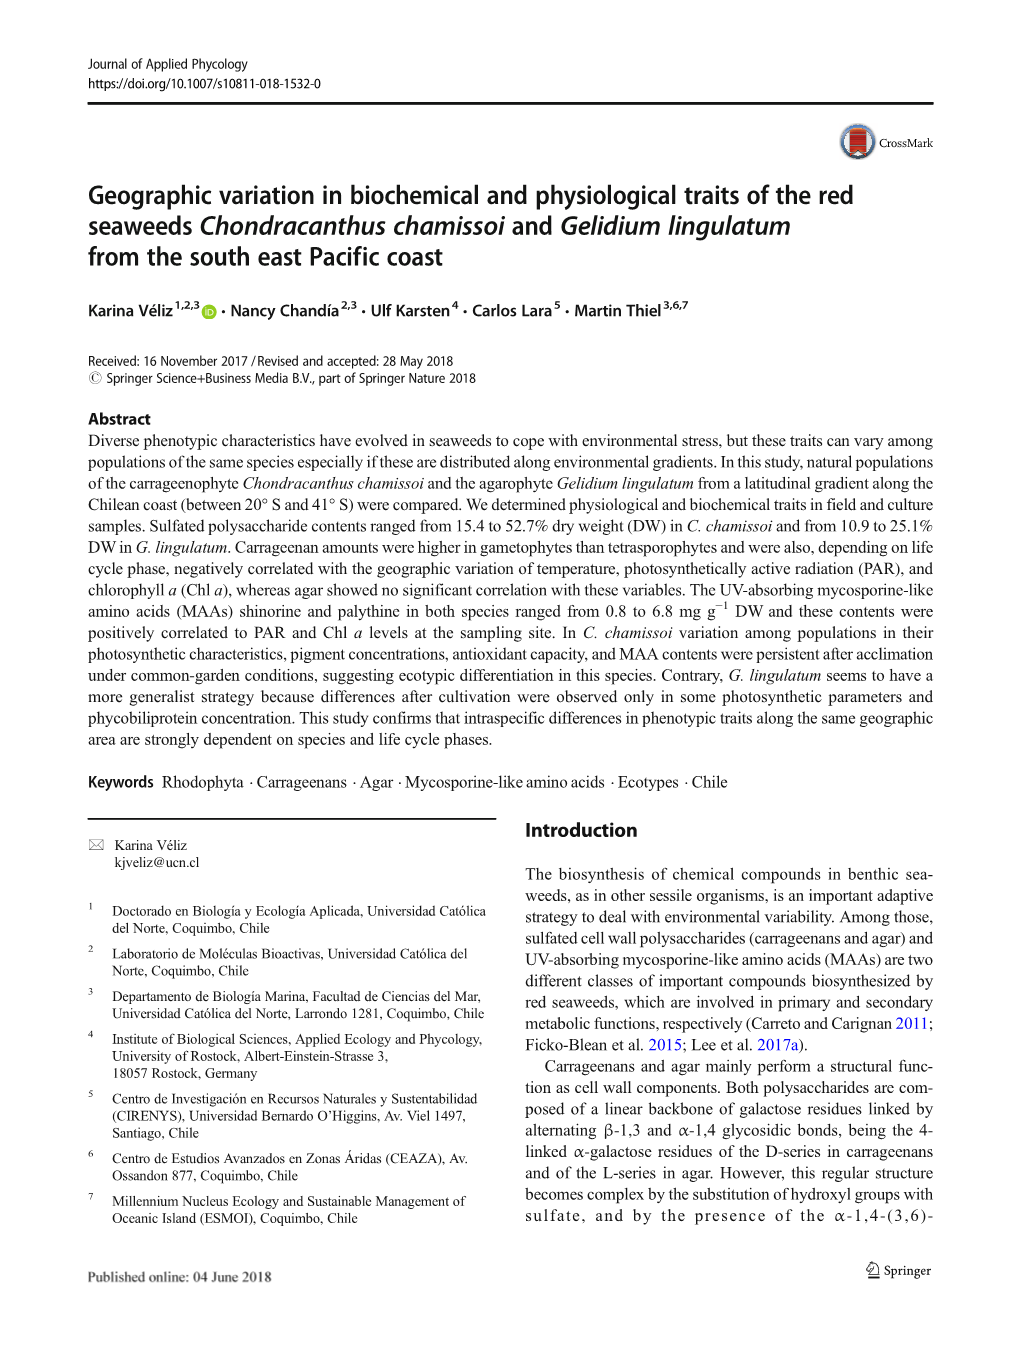 Geographic Variation in Biochemical and Physiological Traits of the Red Seaweeds Chondracanthus Chamissoi and Gelidium Lingulatum from the South East Pacific Coast